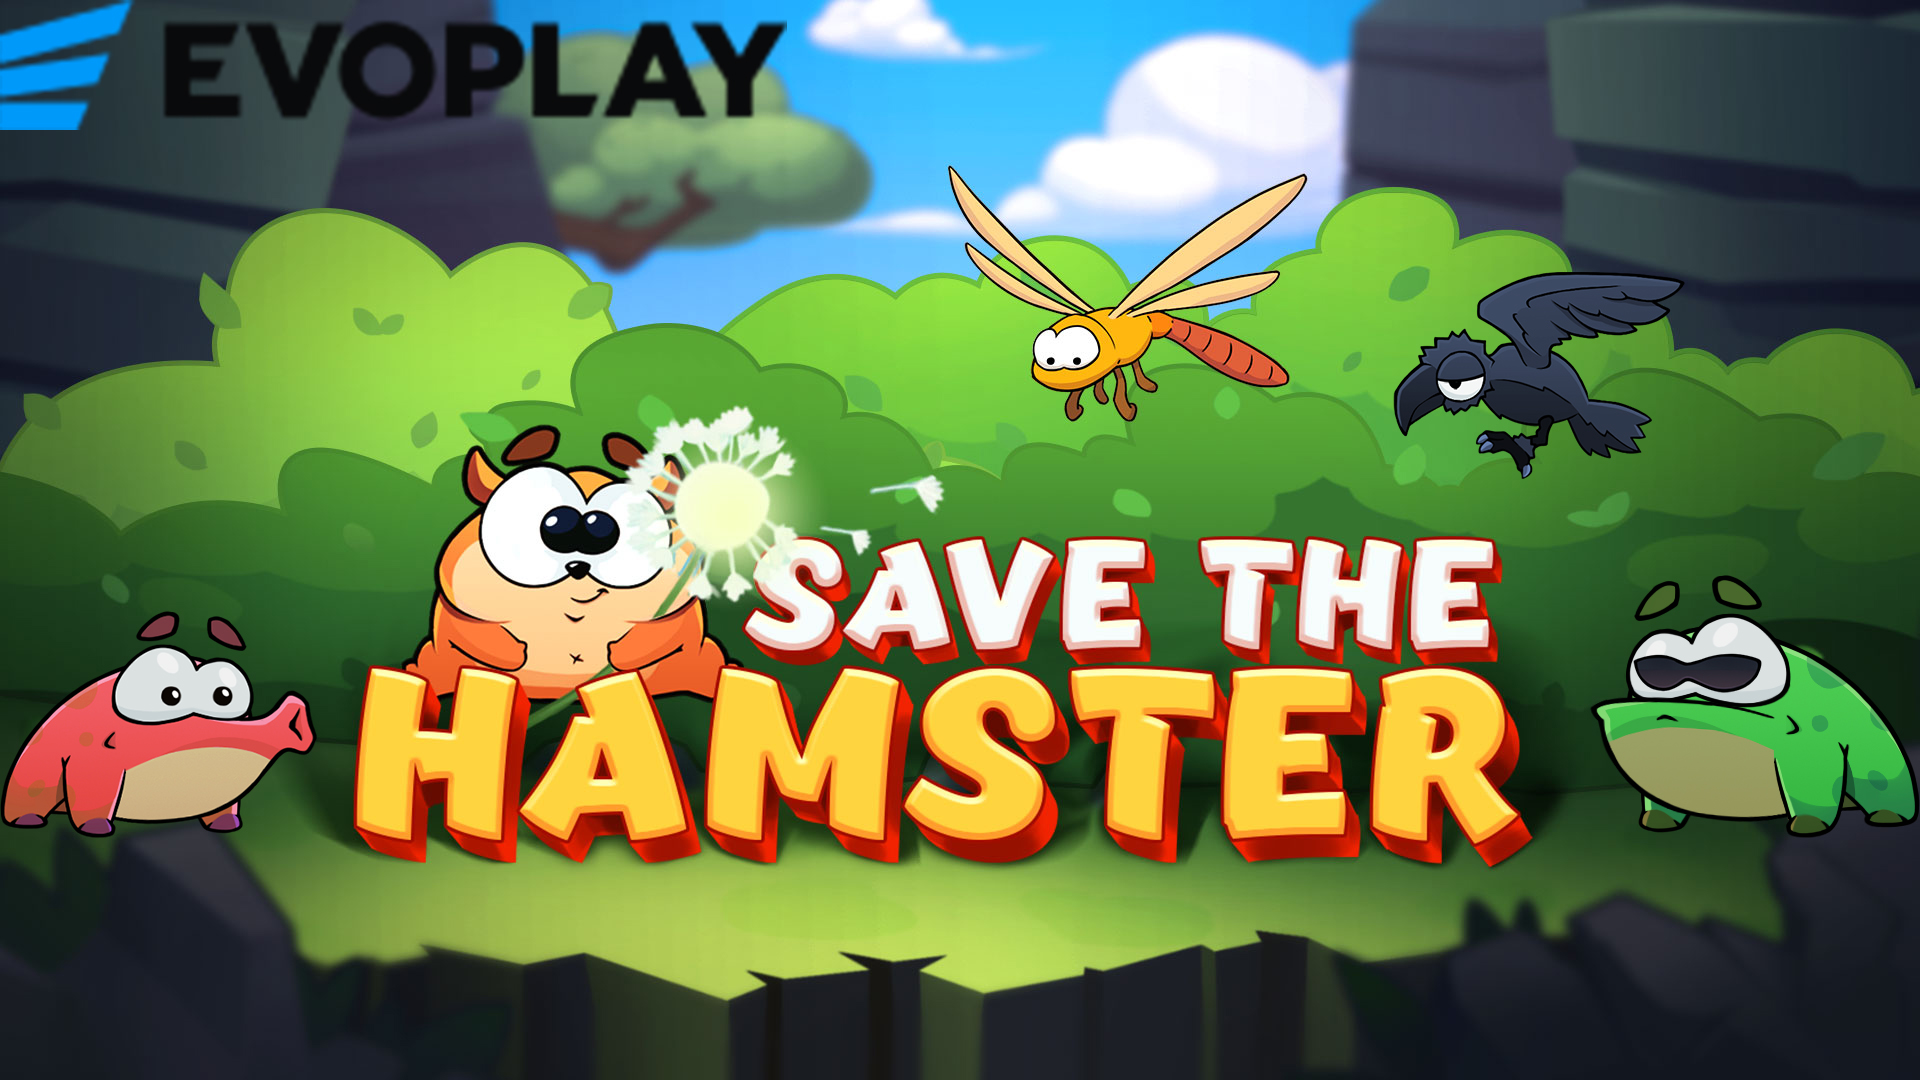 Save The Hamster oleh Evoplay